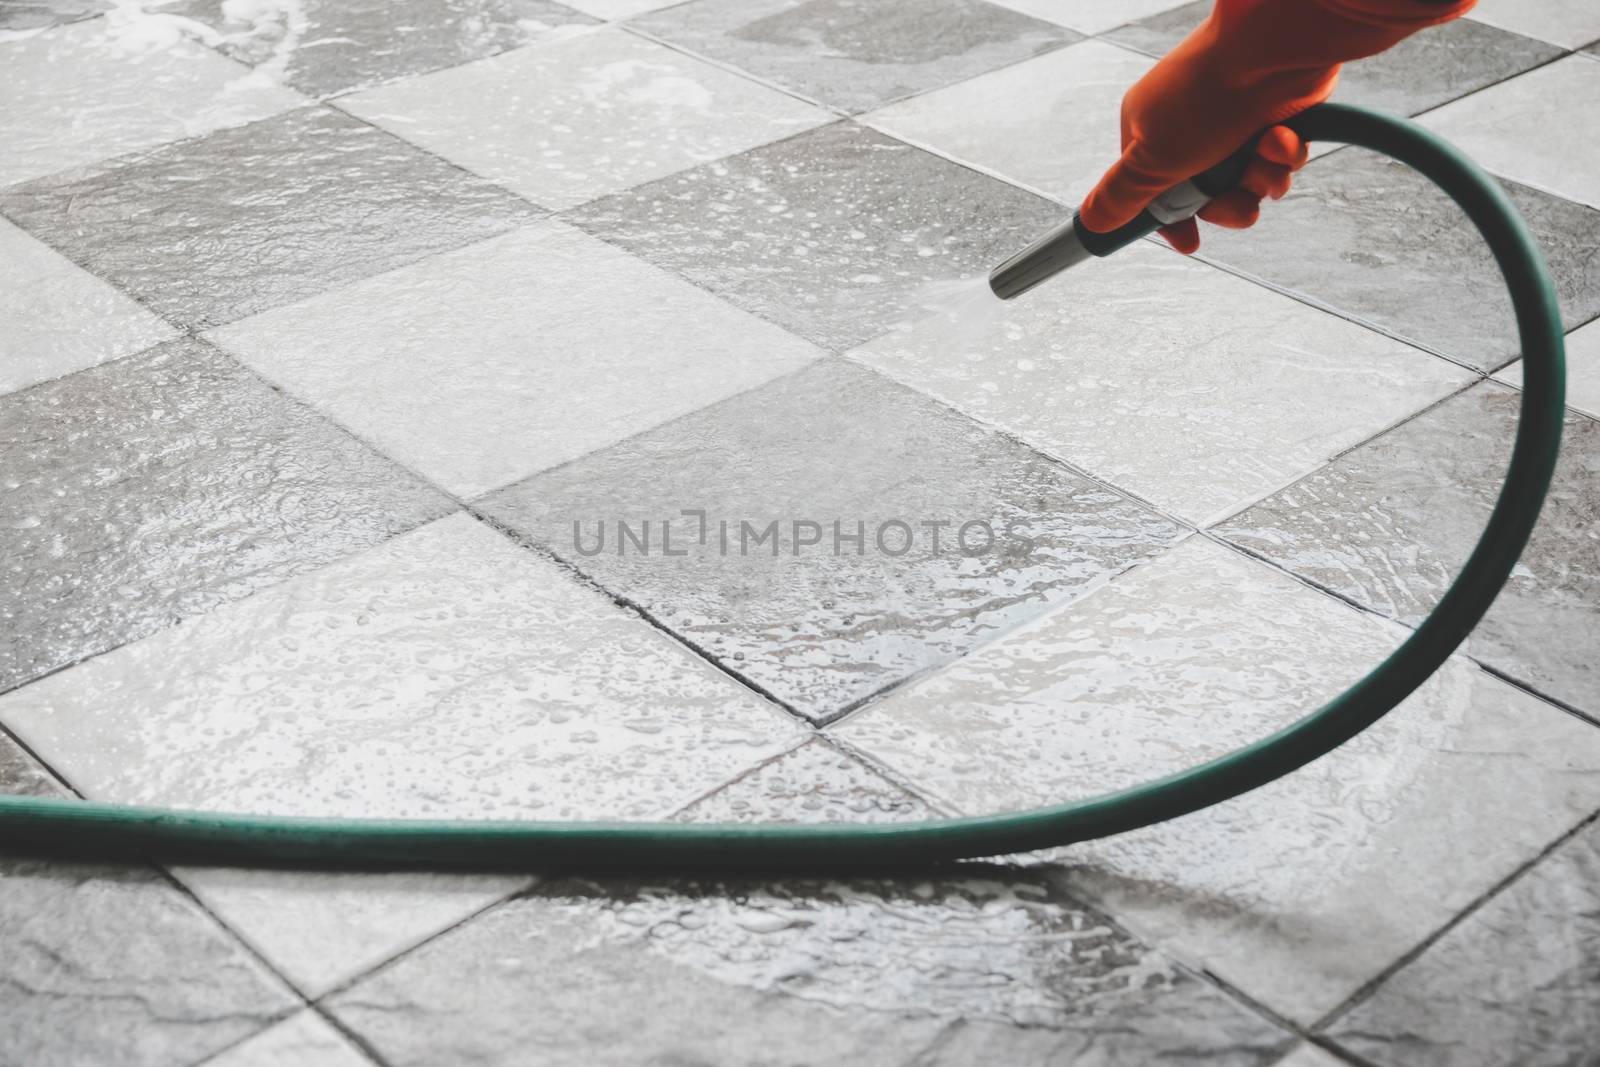 Hand of man wearing orange rubber gloves is use a hose to clean the tile floor.